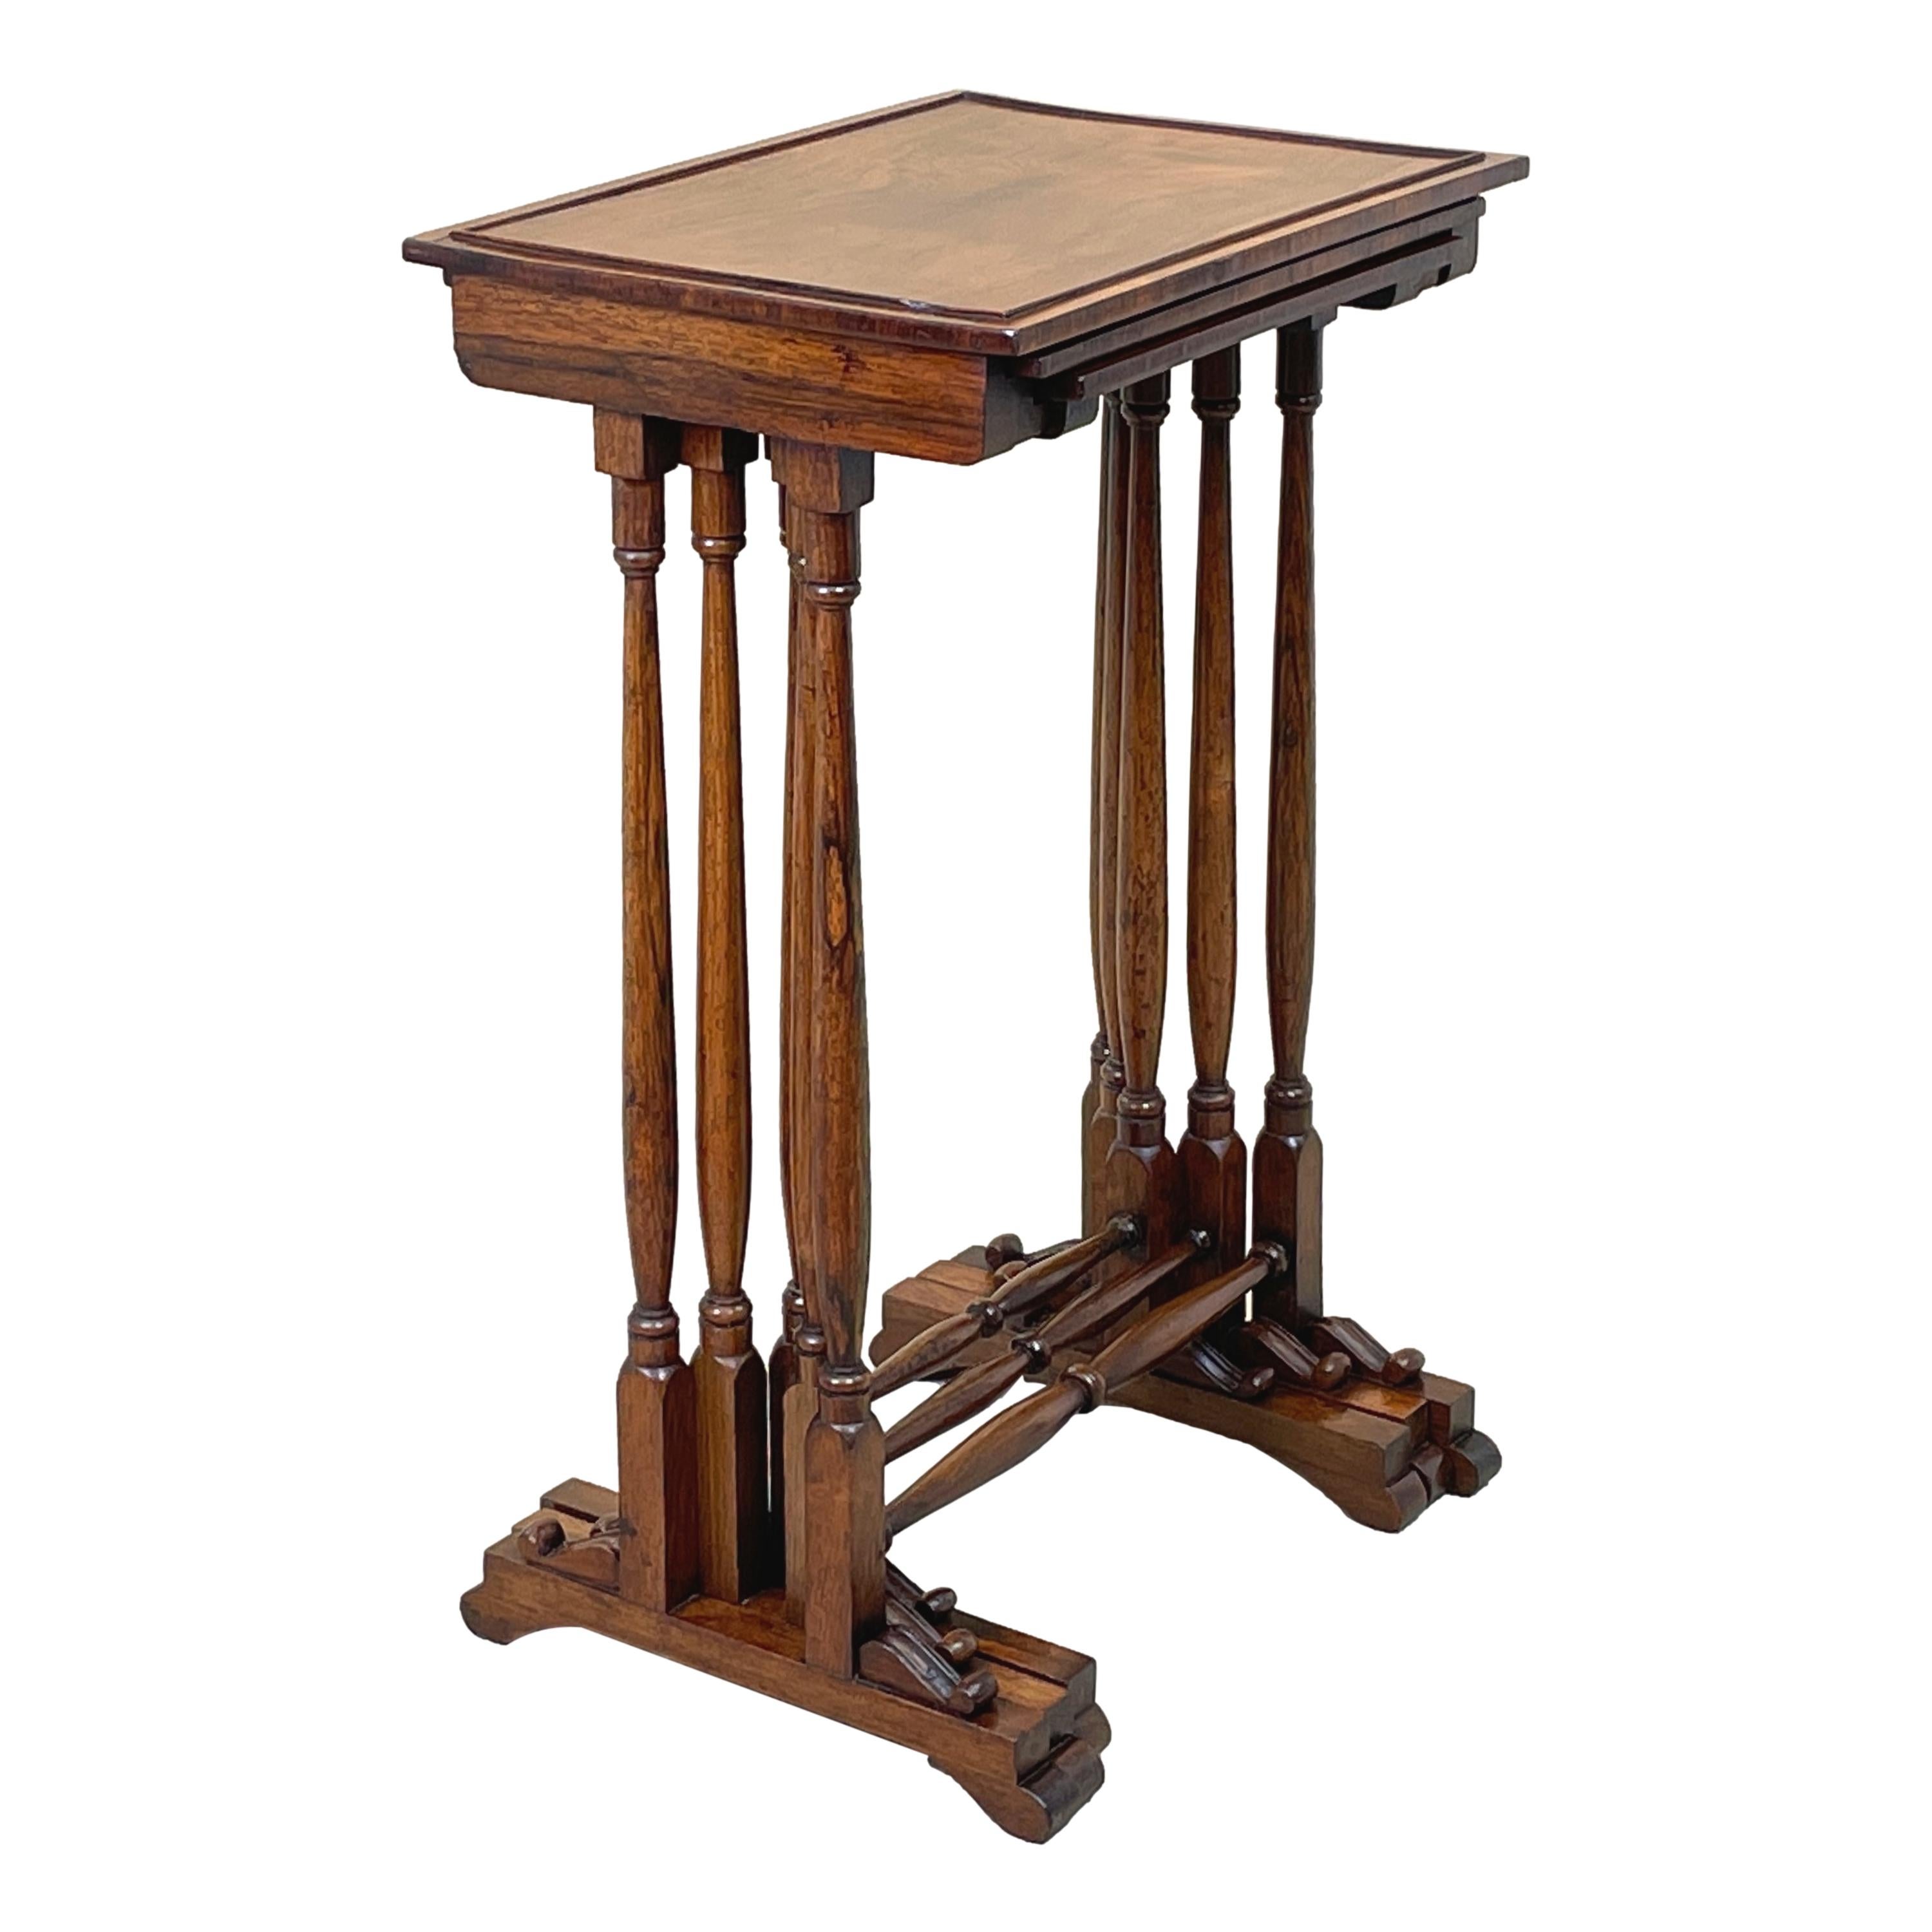 A very good quality Regency nest of three padouk wood coffee tables having extremely well figured cockbeaded tops raised on elegant turned upright supports with attractive scrolling feet

Dating to the late Regency period this nest of three coffee